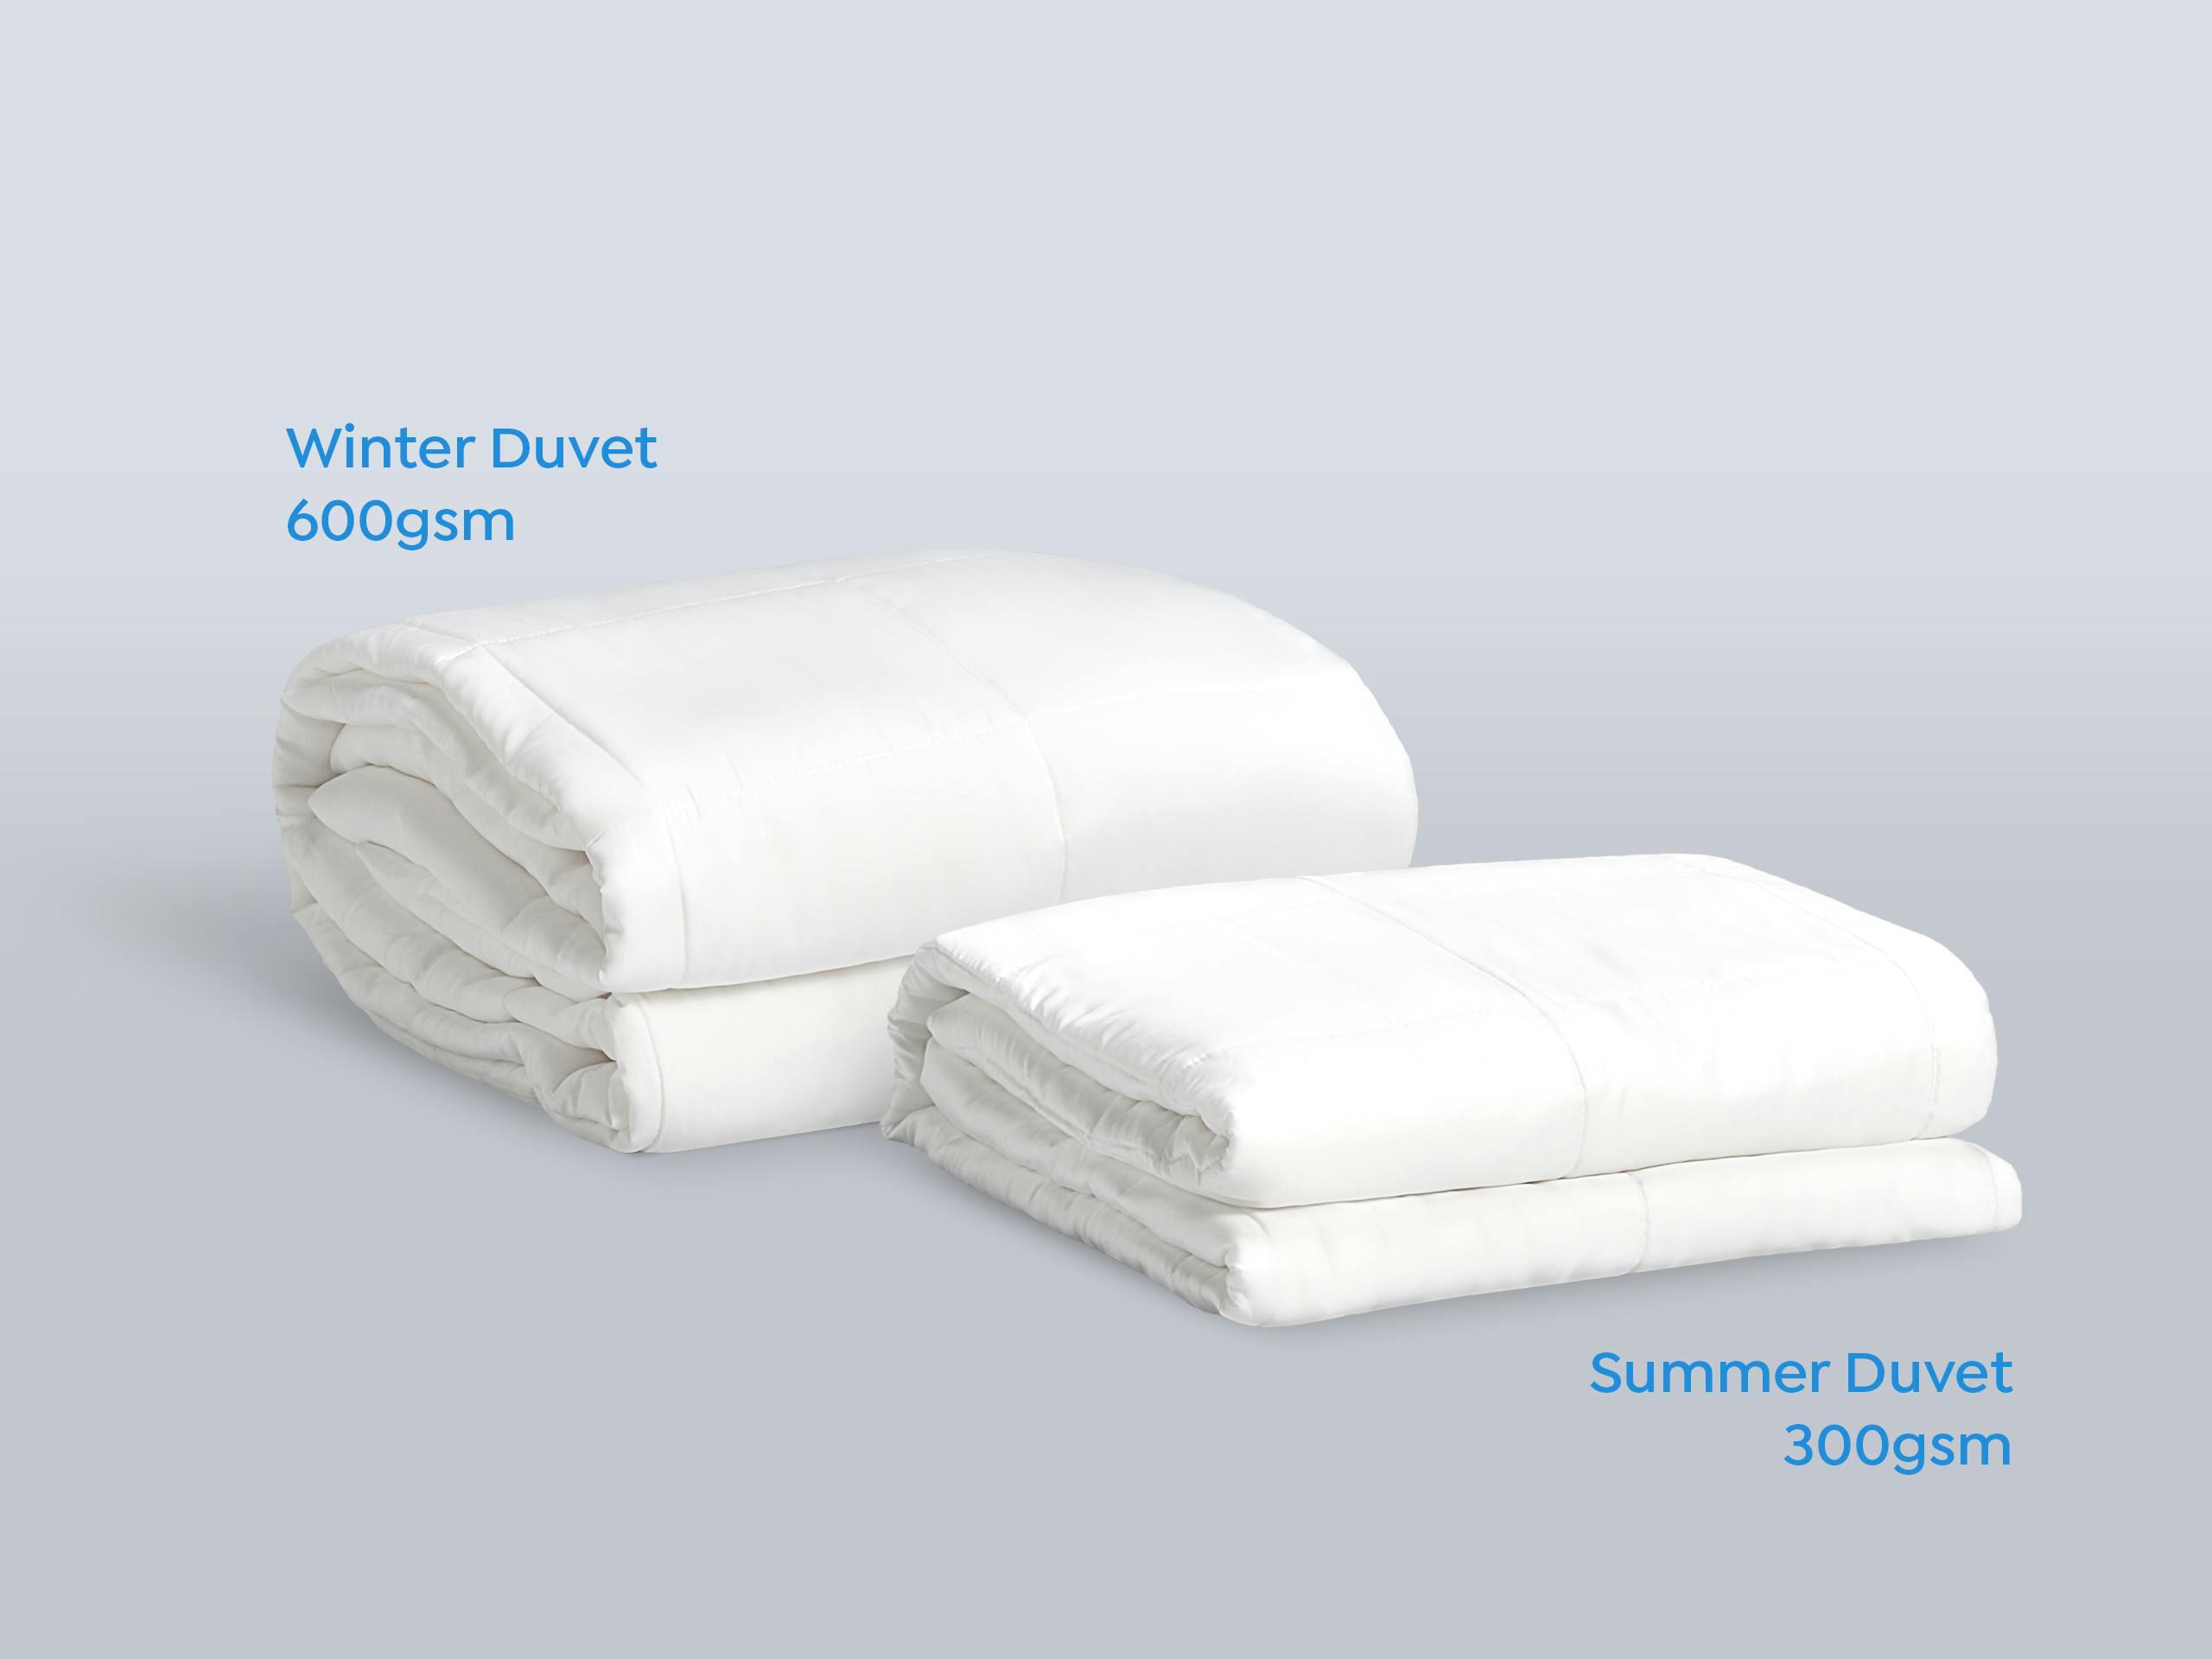 Sleeping Duck Winter Duvet and Summer Duvet neatly folded next to each other.